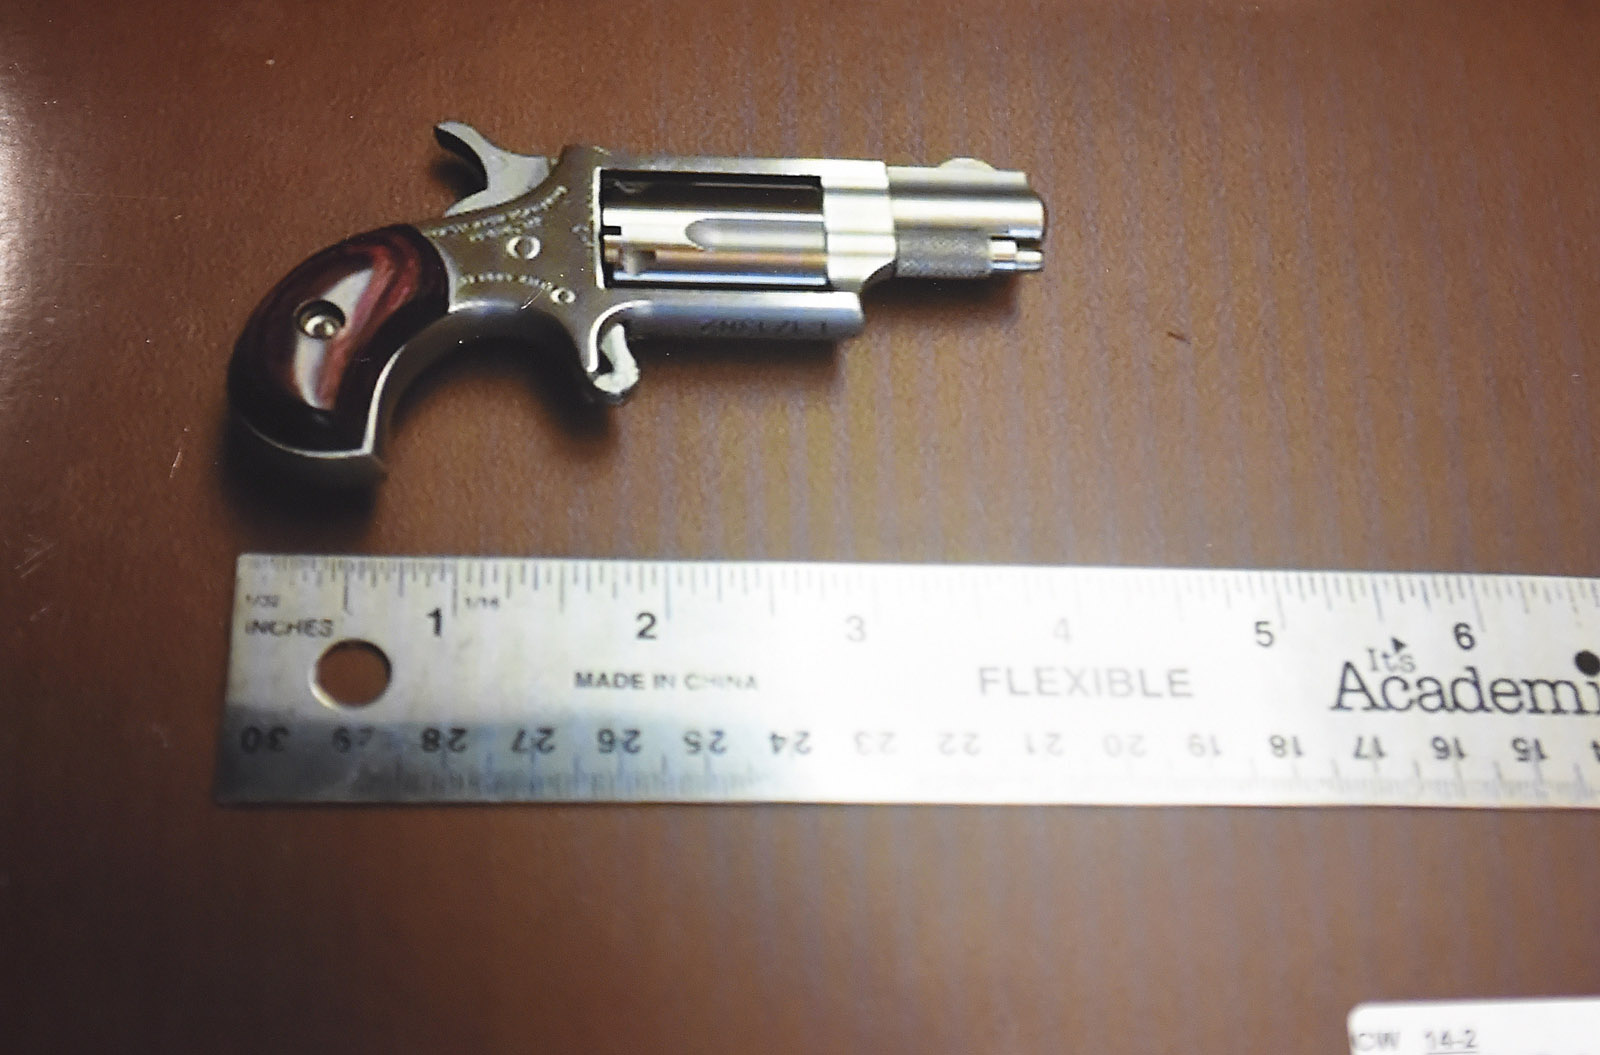 FAIRFAX, VA - OCTOBER 13: An example of a type of a revolver purchased by Linda Robra when Charles Severance was living with her is displayed for a photograph during a break during the Charles Severance trial in Fairfax County Circuit Court on Tuesday October 13, 2015 in Fairfax, VA. This firearm is not involved in the case, it is an example of the type of revolver purchased by Robra. Severance is accused of three murders over the course of a decade in Alexandria, VA. (Photo by Matt McClain/The Washington Post)